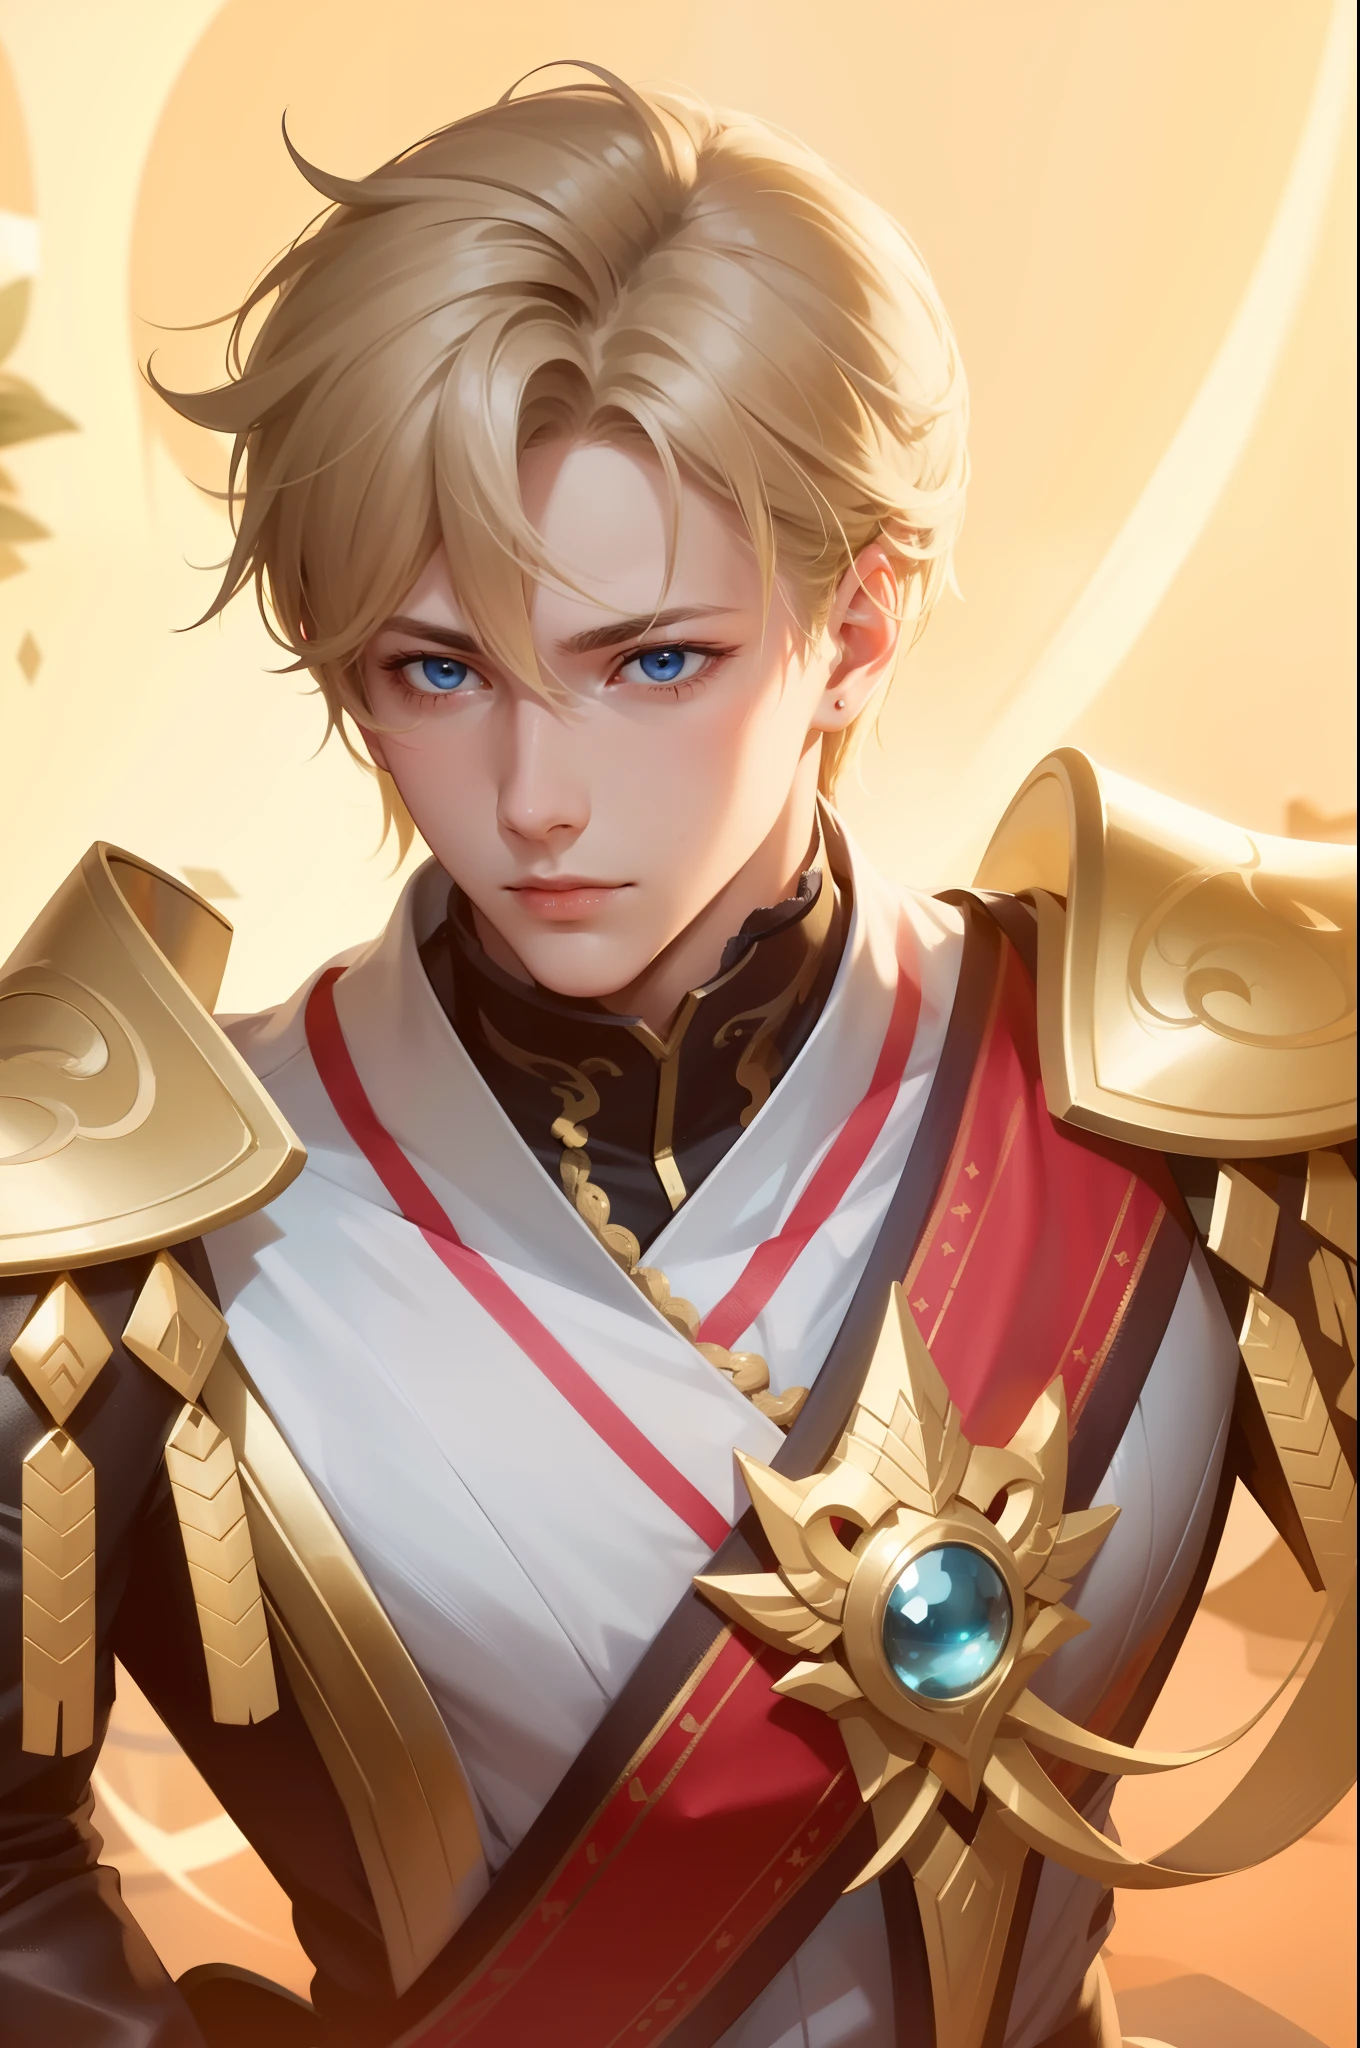 Attractive profile picture, masterpiece, ultra-precise rendering, beautiful and cool young man, trustworthy, dependable young man, savior of the world, simple design, most beautiful image, 4K, blonde hair, light blue eyes.